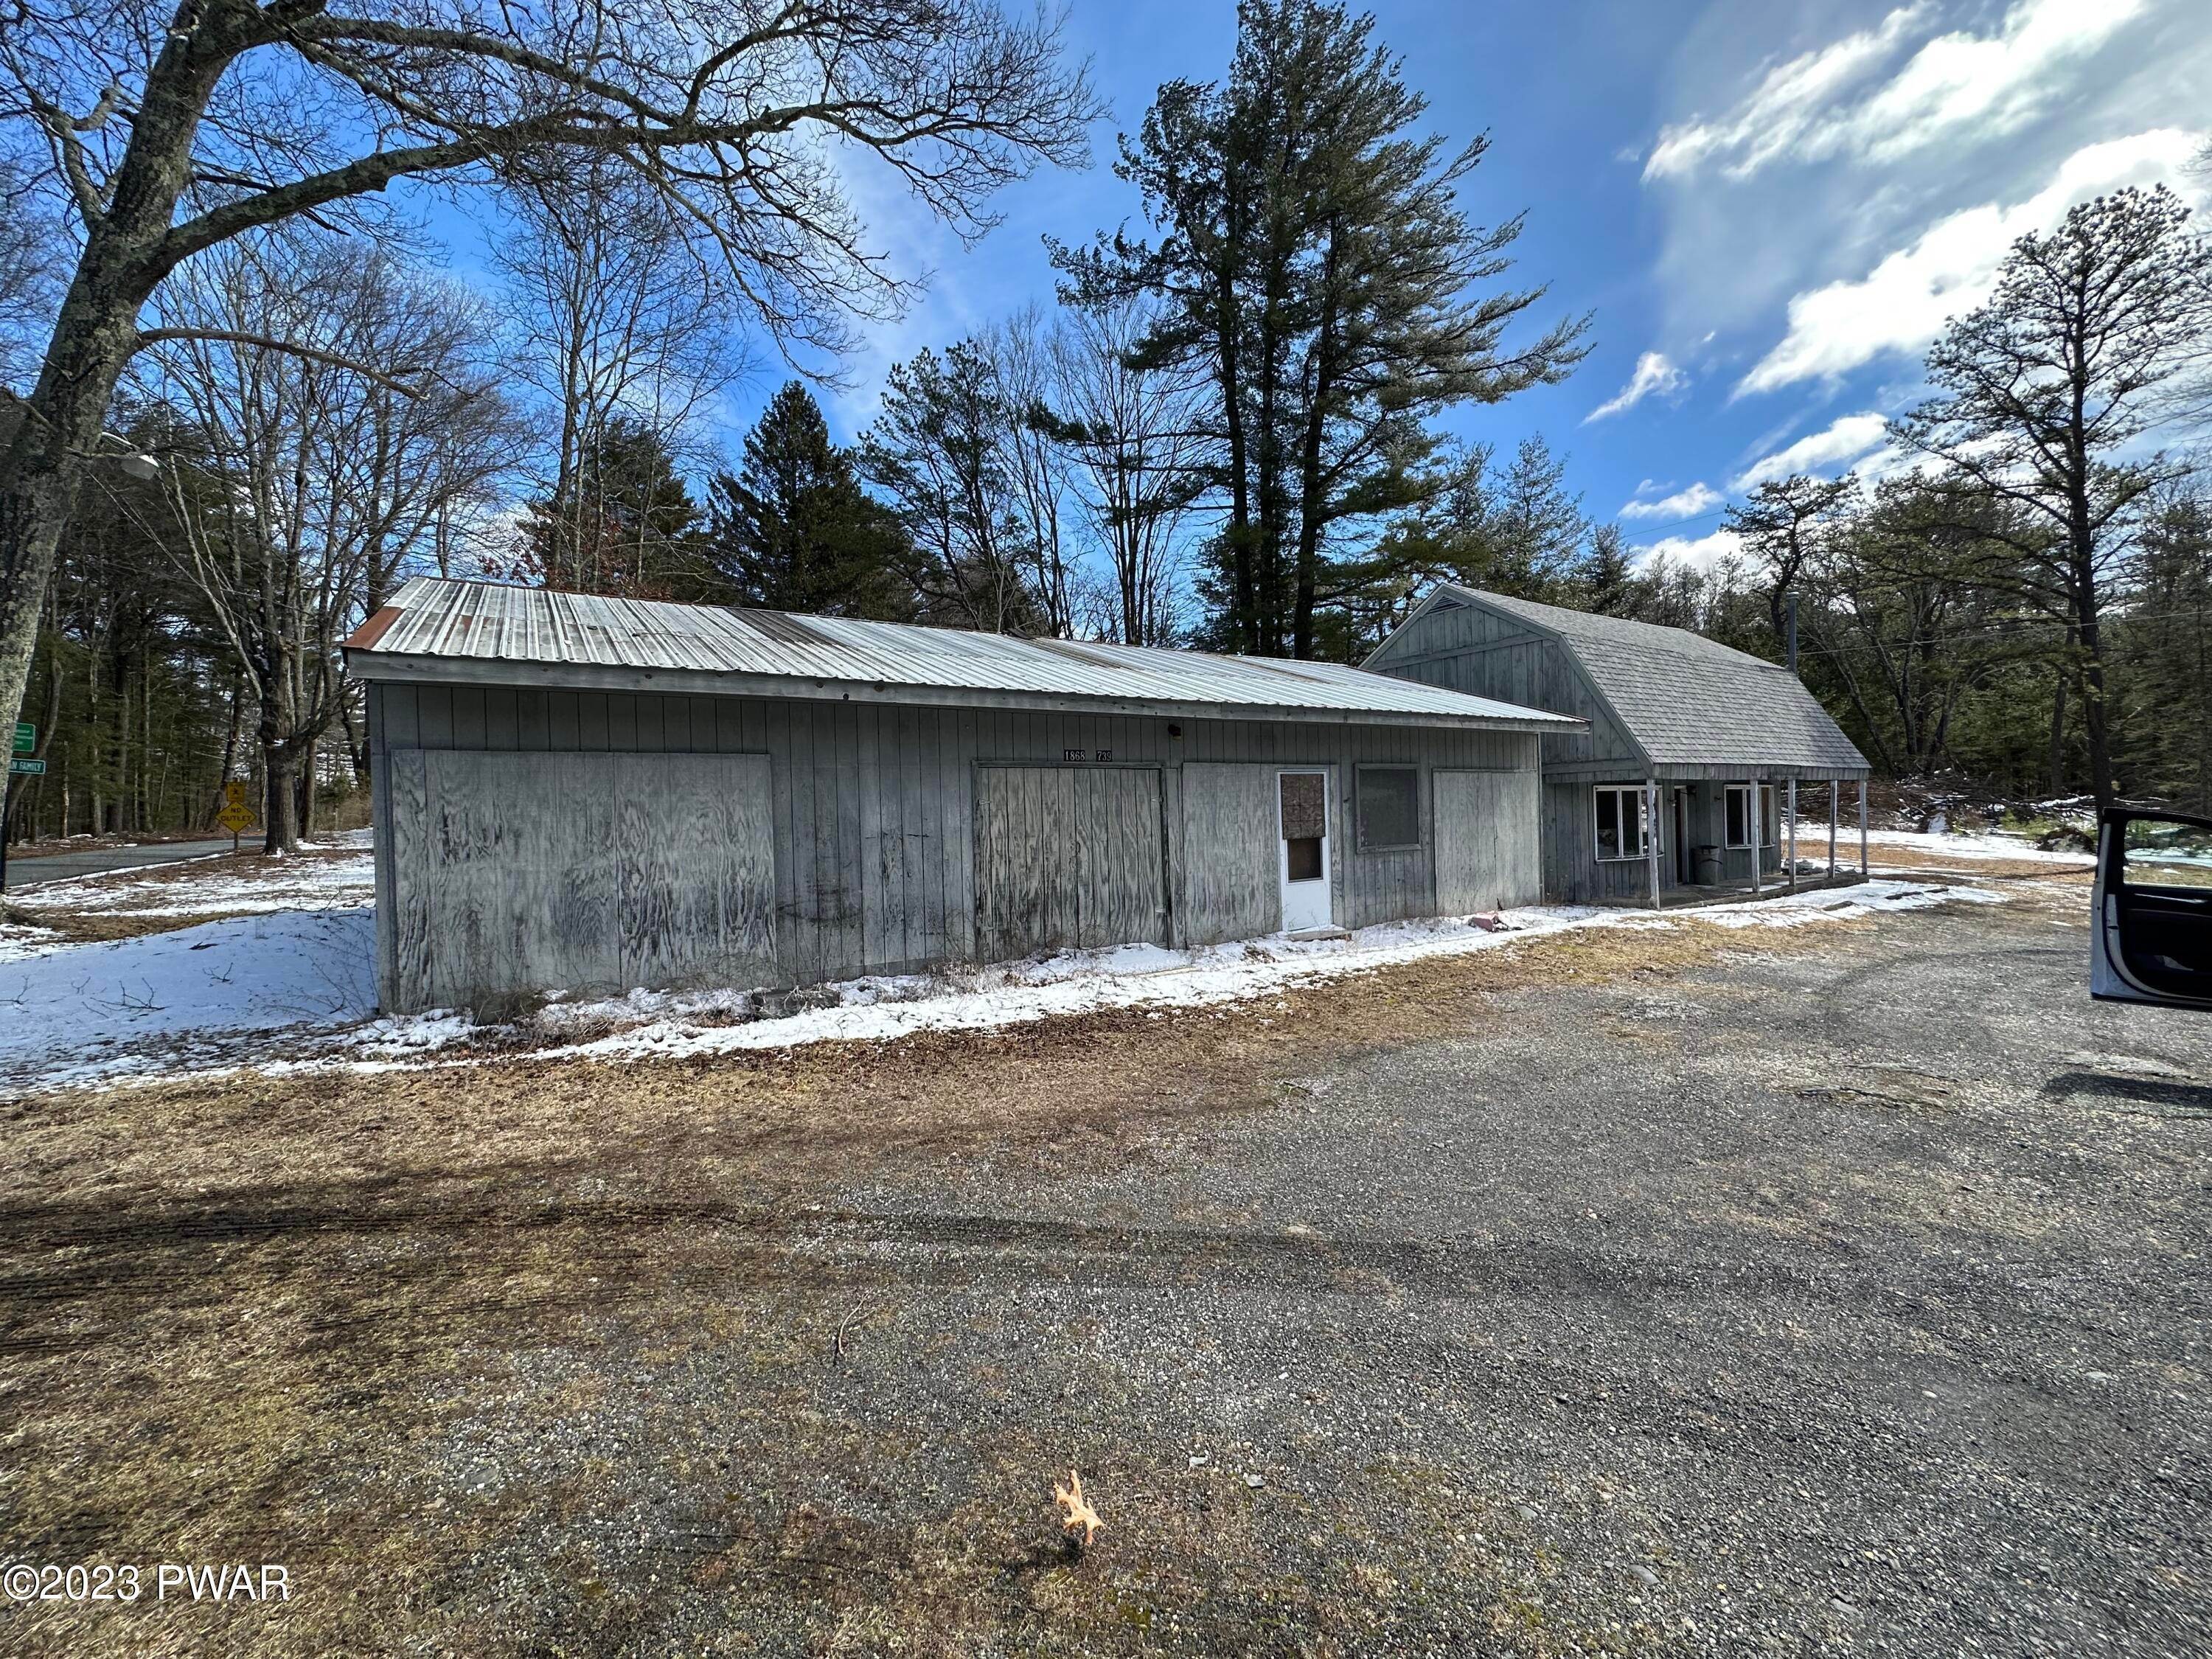 Property for Sale at 1868 Pa-739 Dingmans Ferry, Pennsylvania 18328 United States